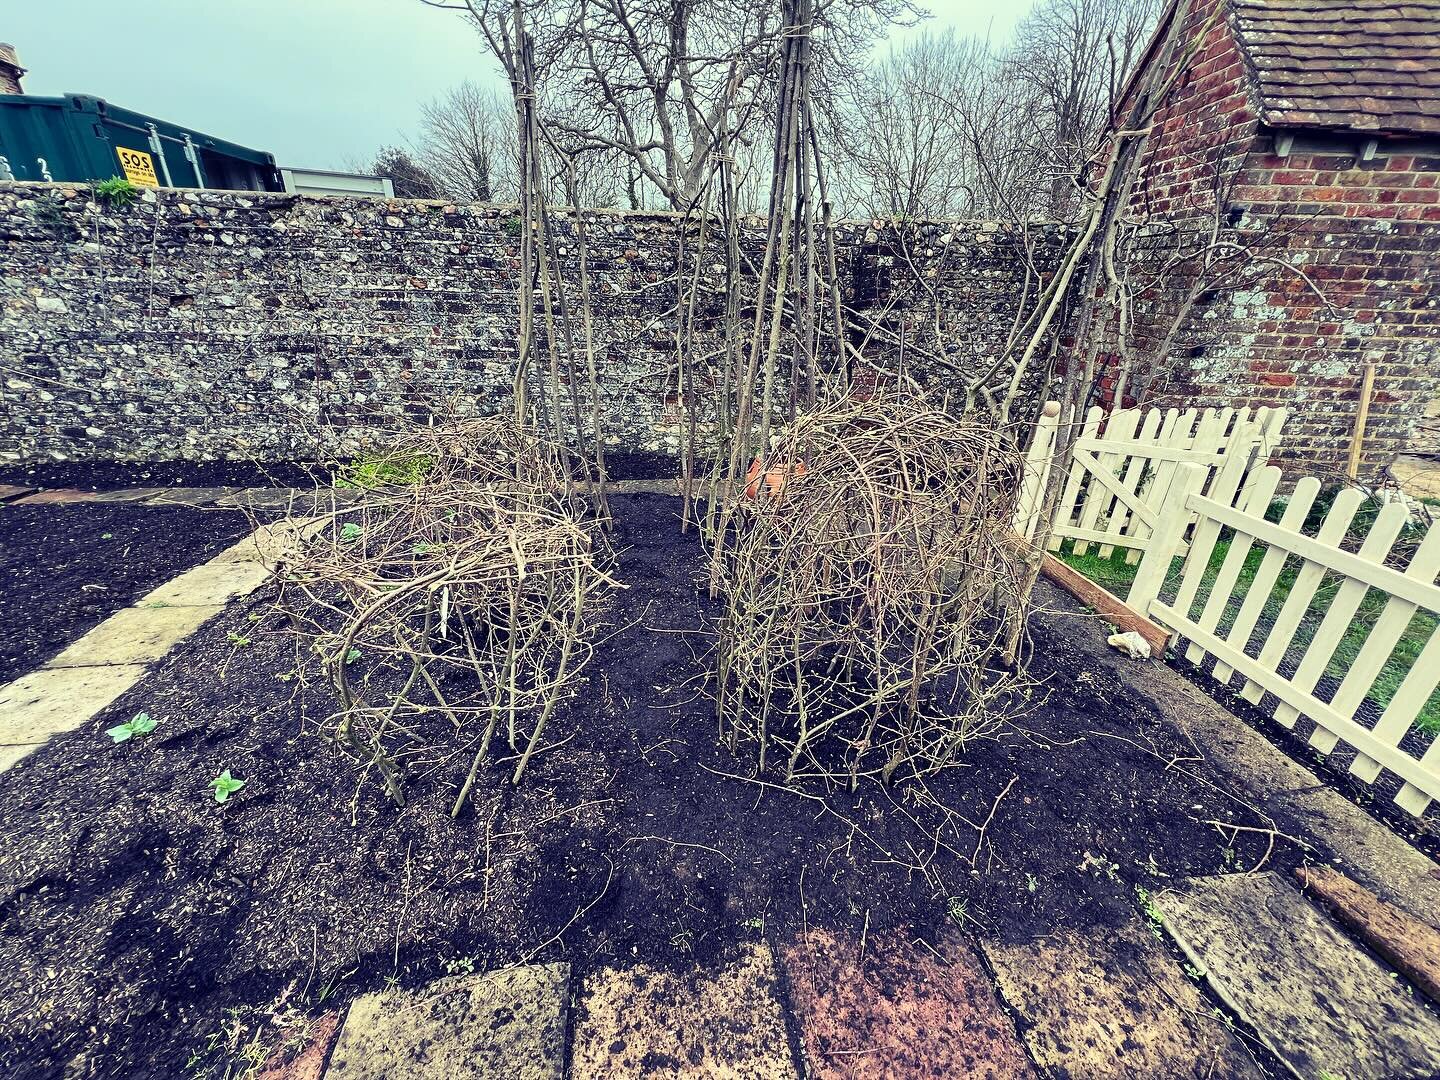 Just finished establishing the hazel bean poles and the pea cages.  A video will be out soon showing how they&rsquo;re produced #hazel #beanpoles #peasupports #hazelsupports #hazelcages #gardening #garden #veg #vegetablegarden #veggarden #organic #or